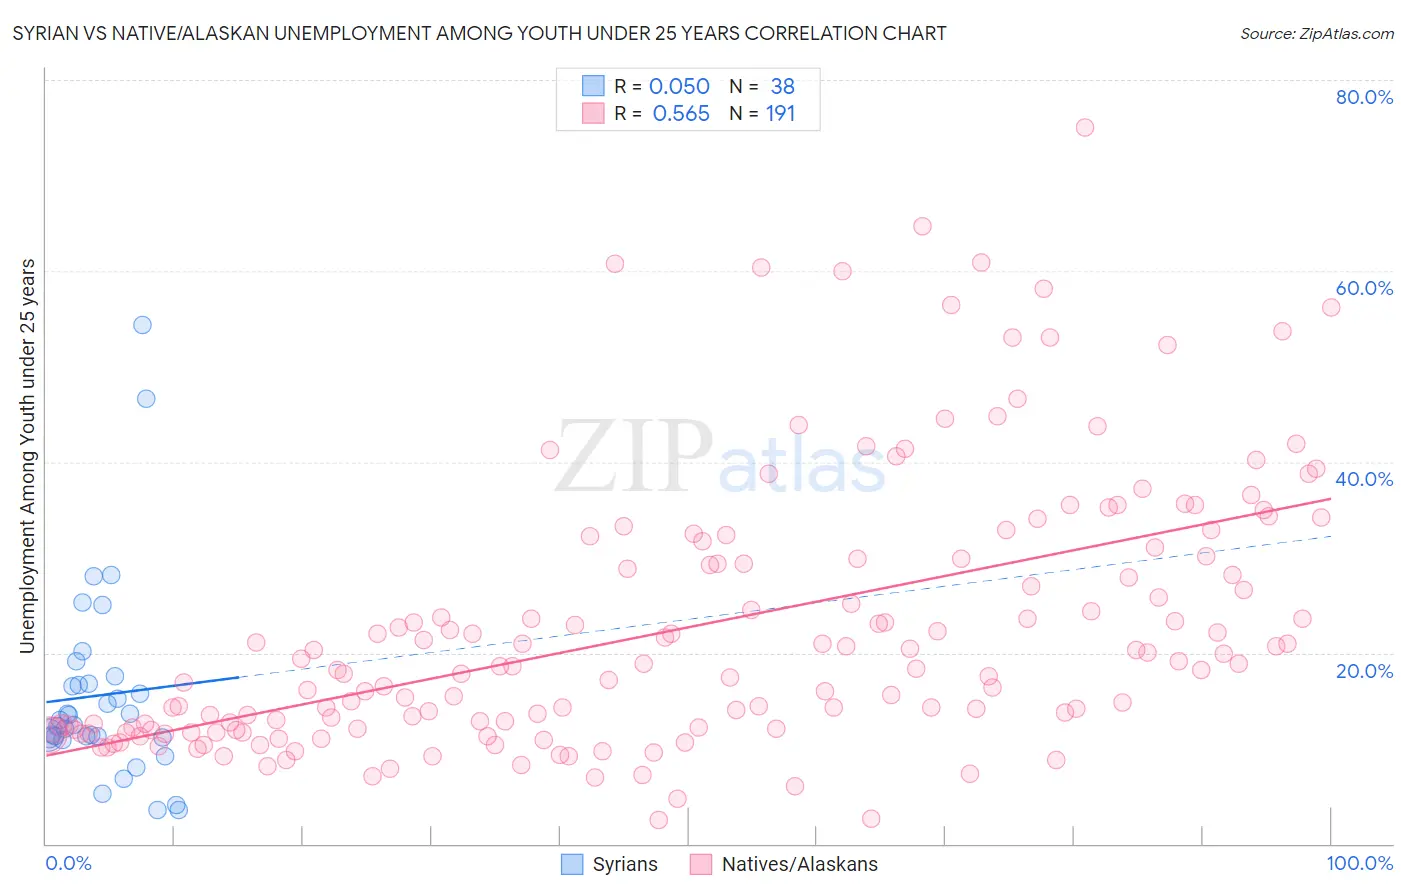 Syrian vs Native/Alaskan Unemployment Among Youth under 25 years